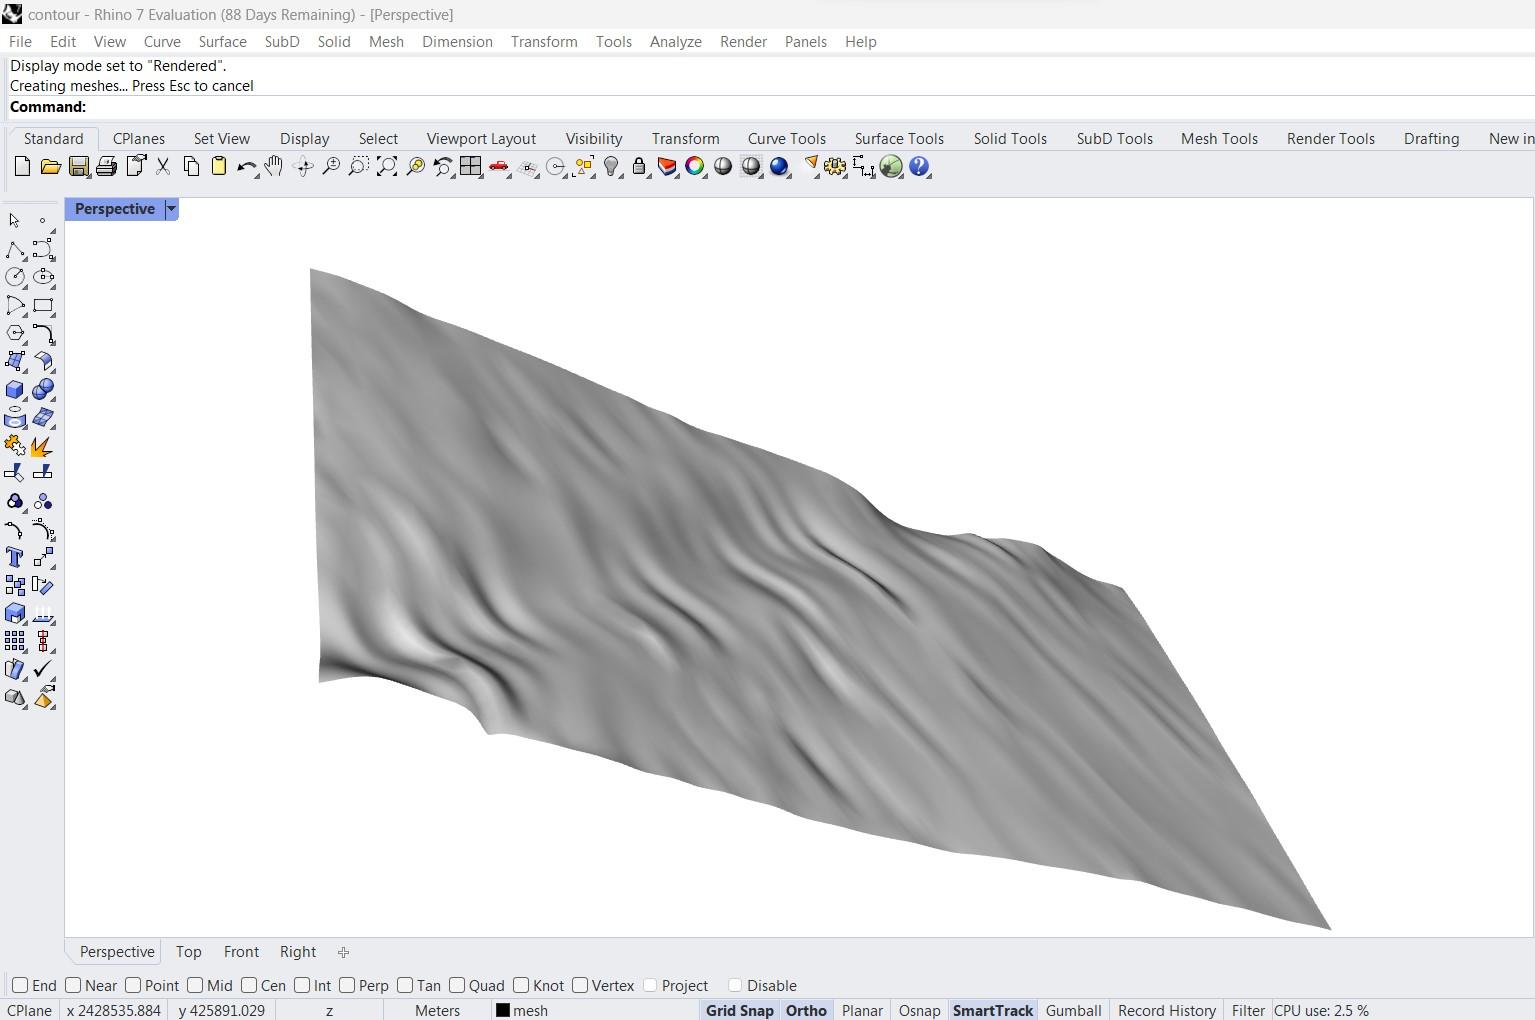 Rhino 3D mesh created from AutoCAD drawing file (.dwg) contours from Equator